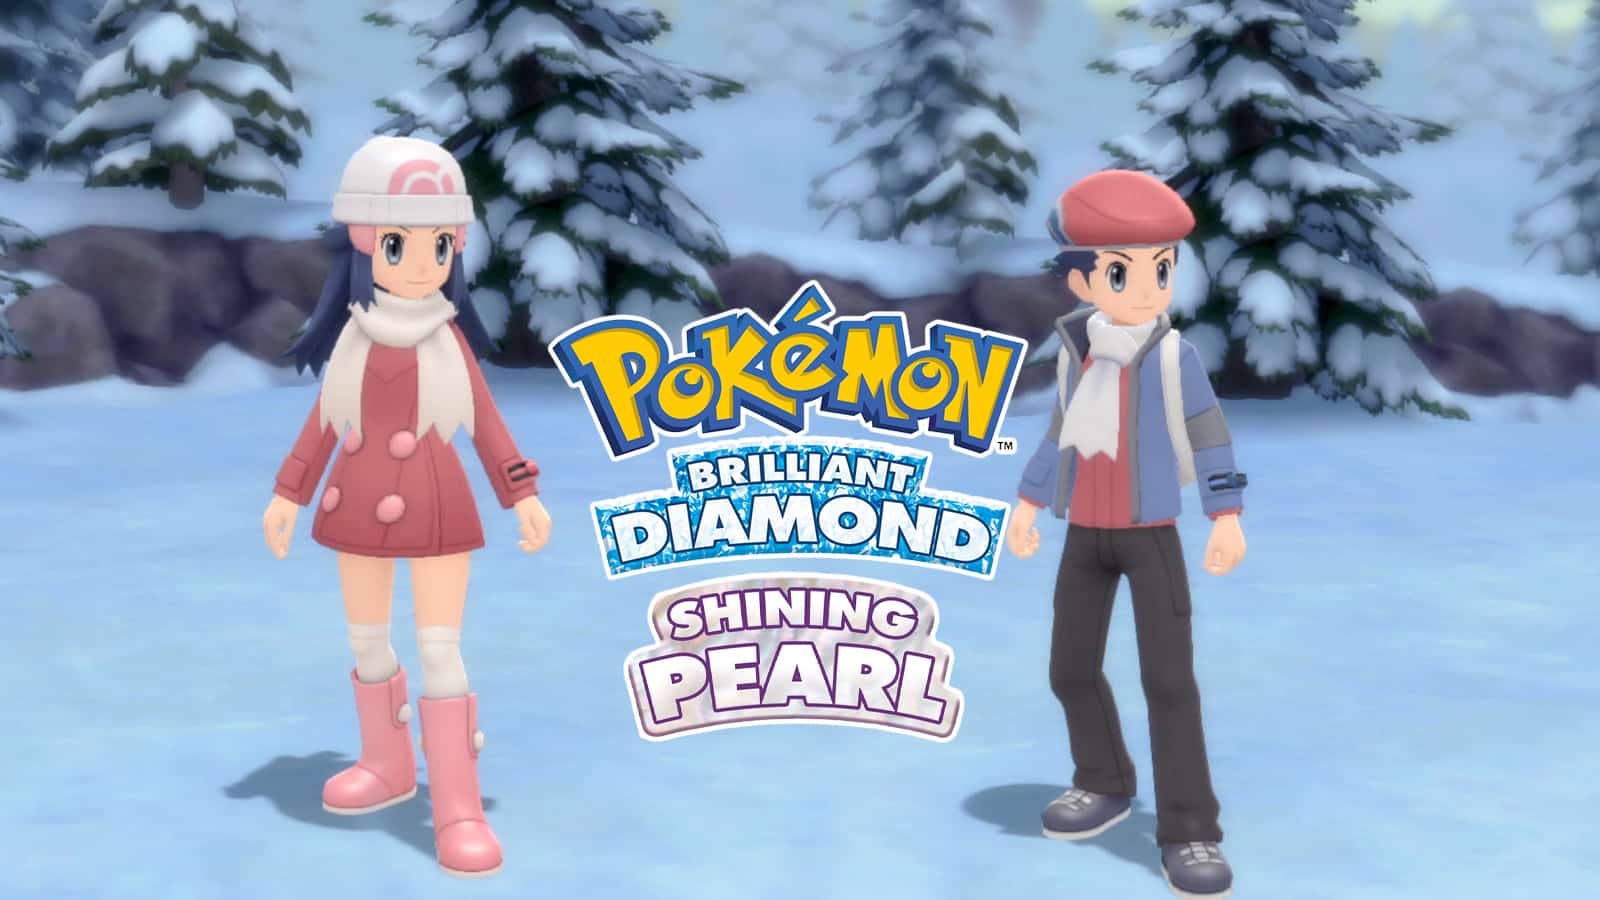 How to get Pokemon Platinum outfits in Pokemon Diamond & Pearl